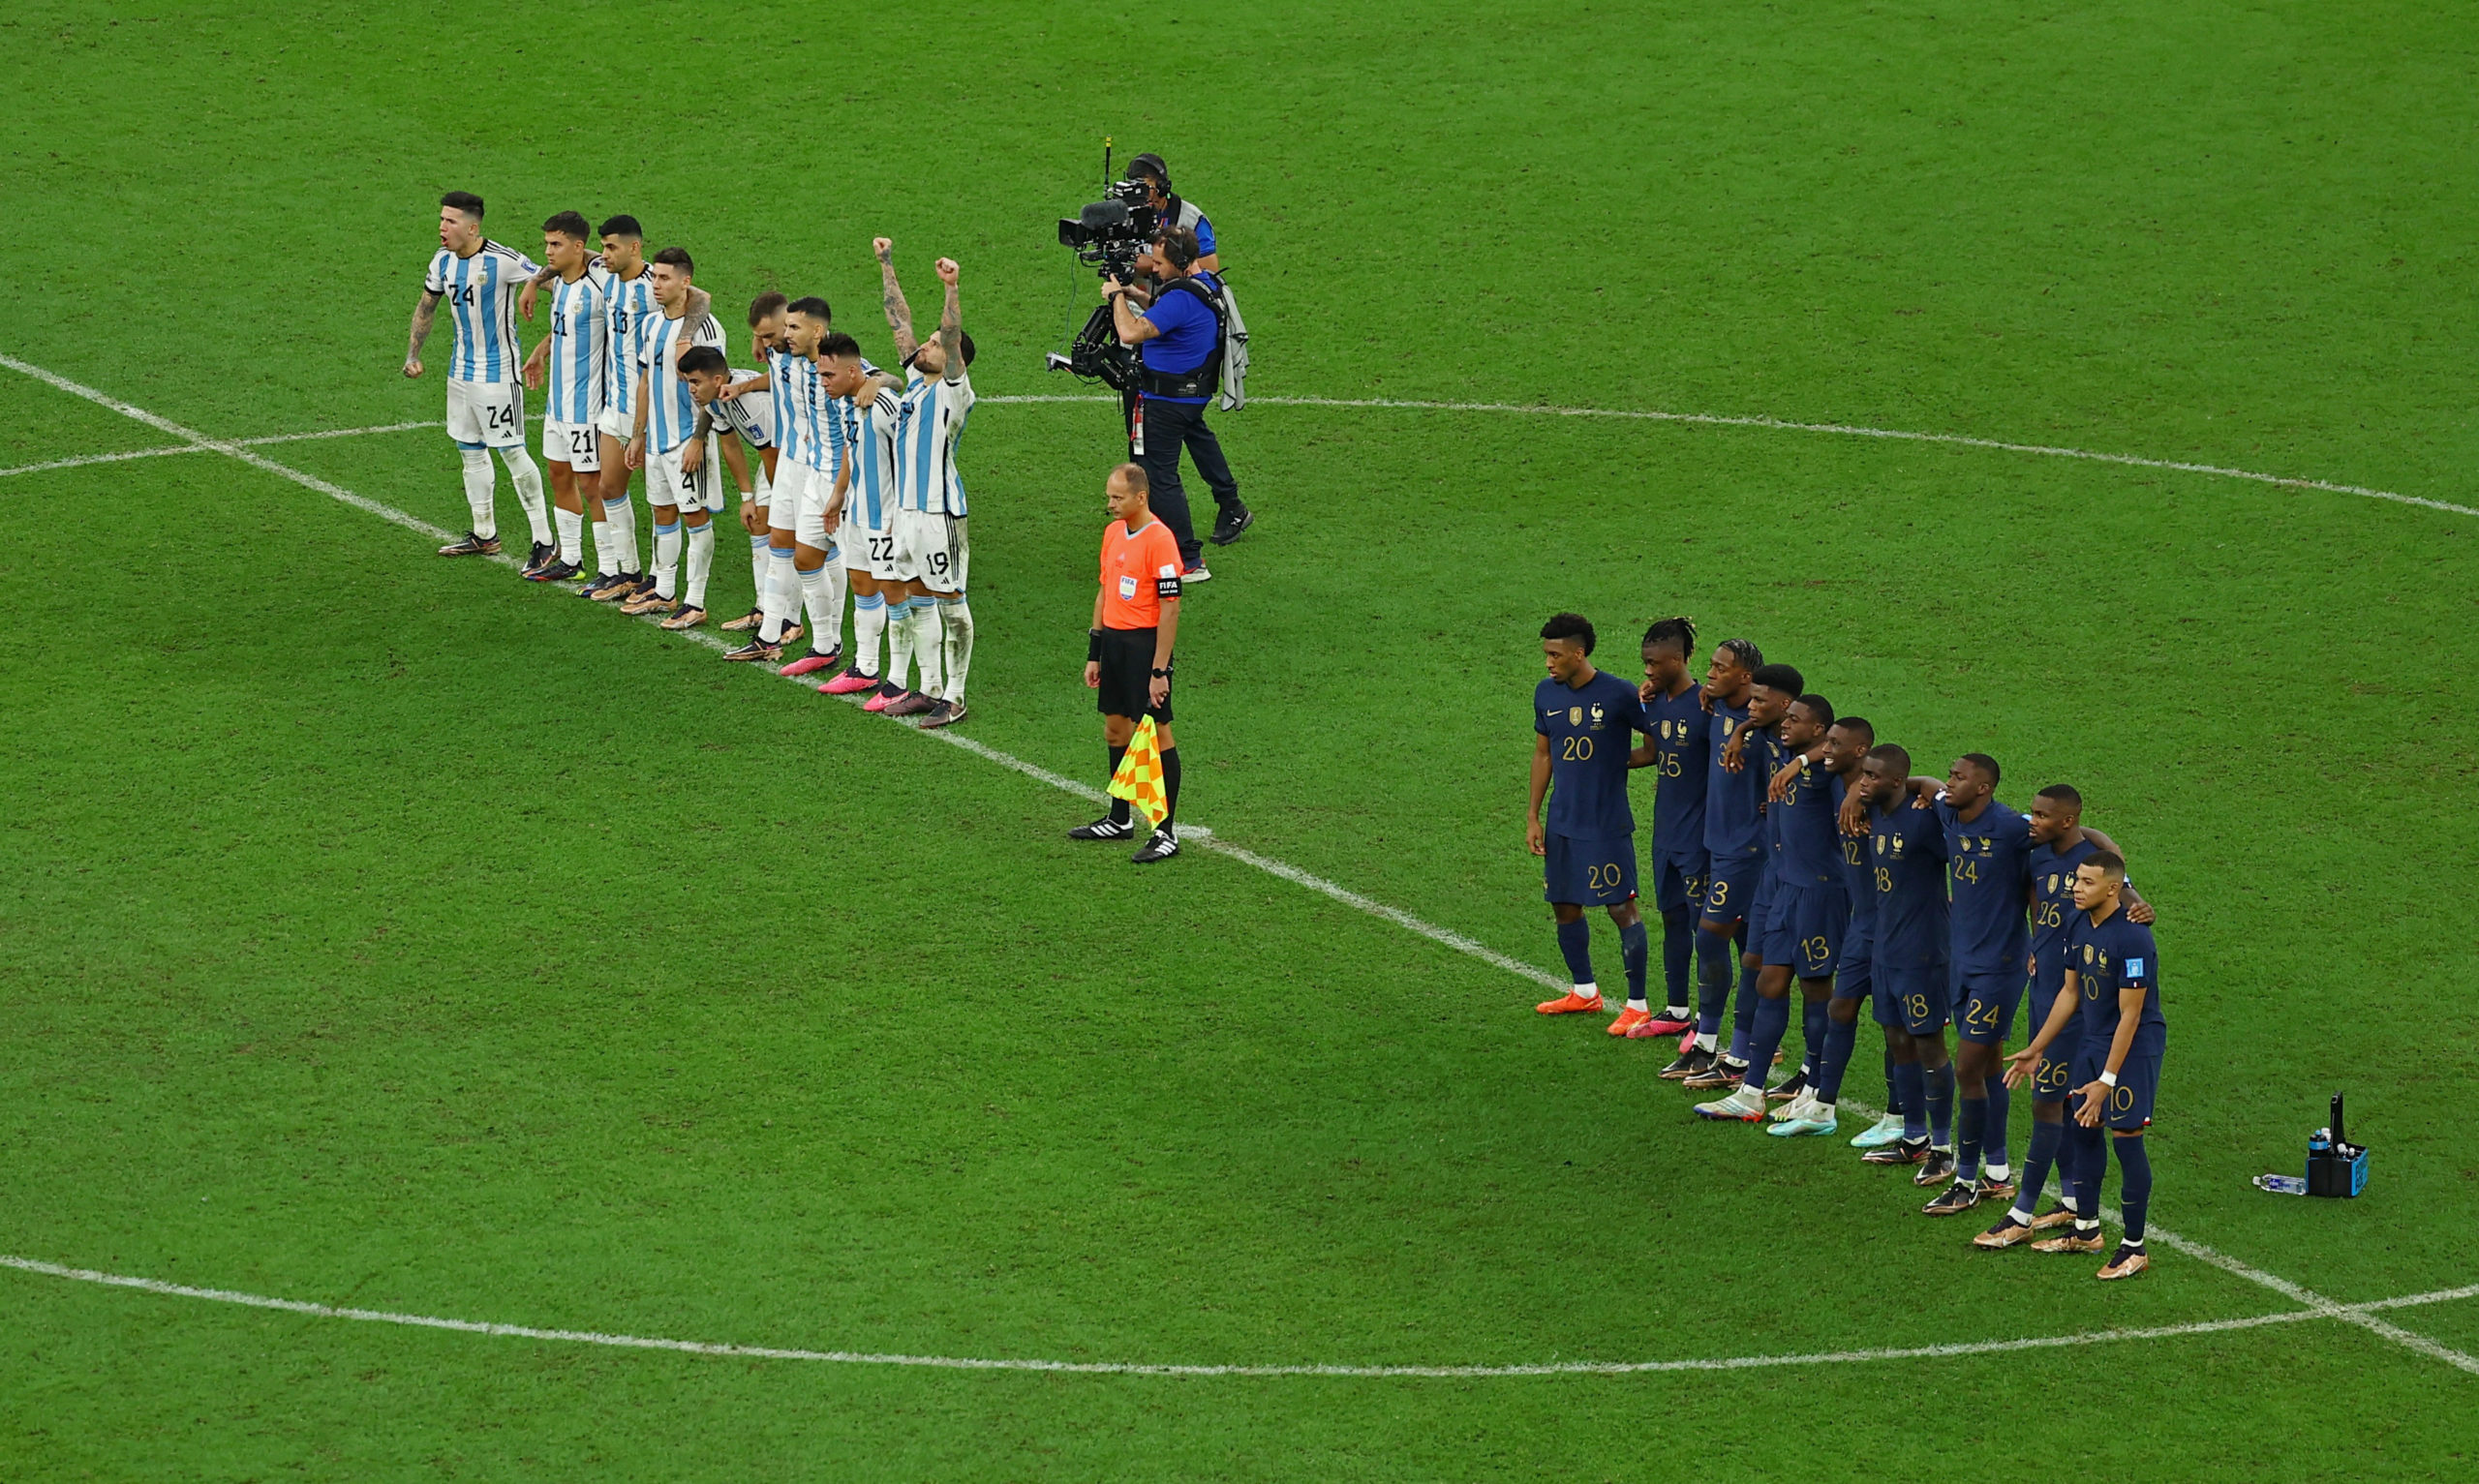 Argentina France World Cup final